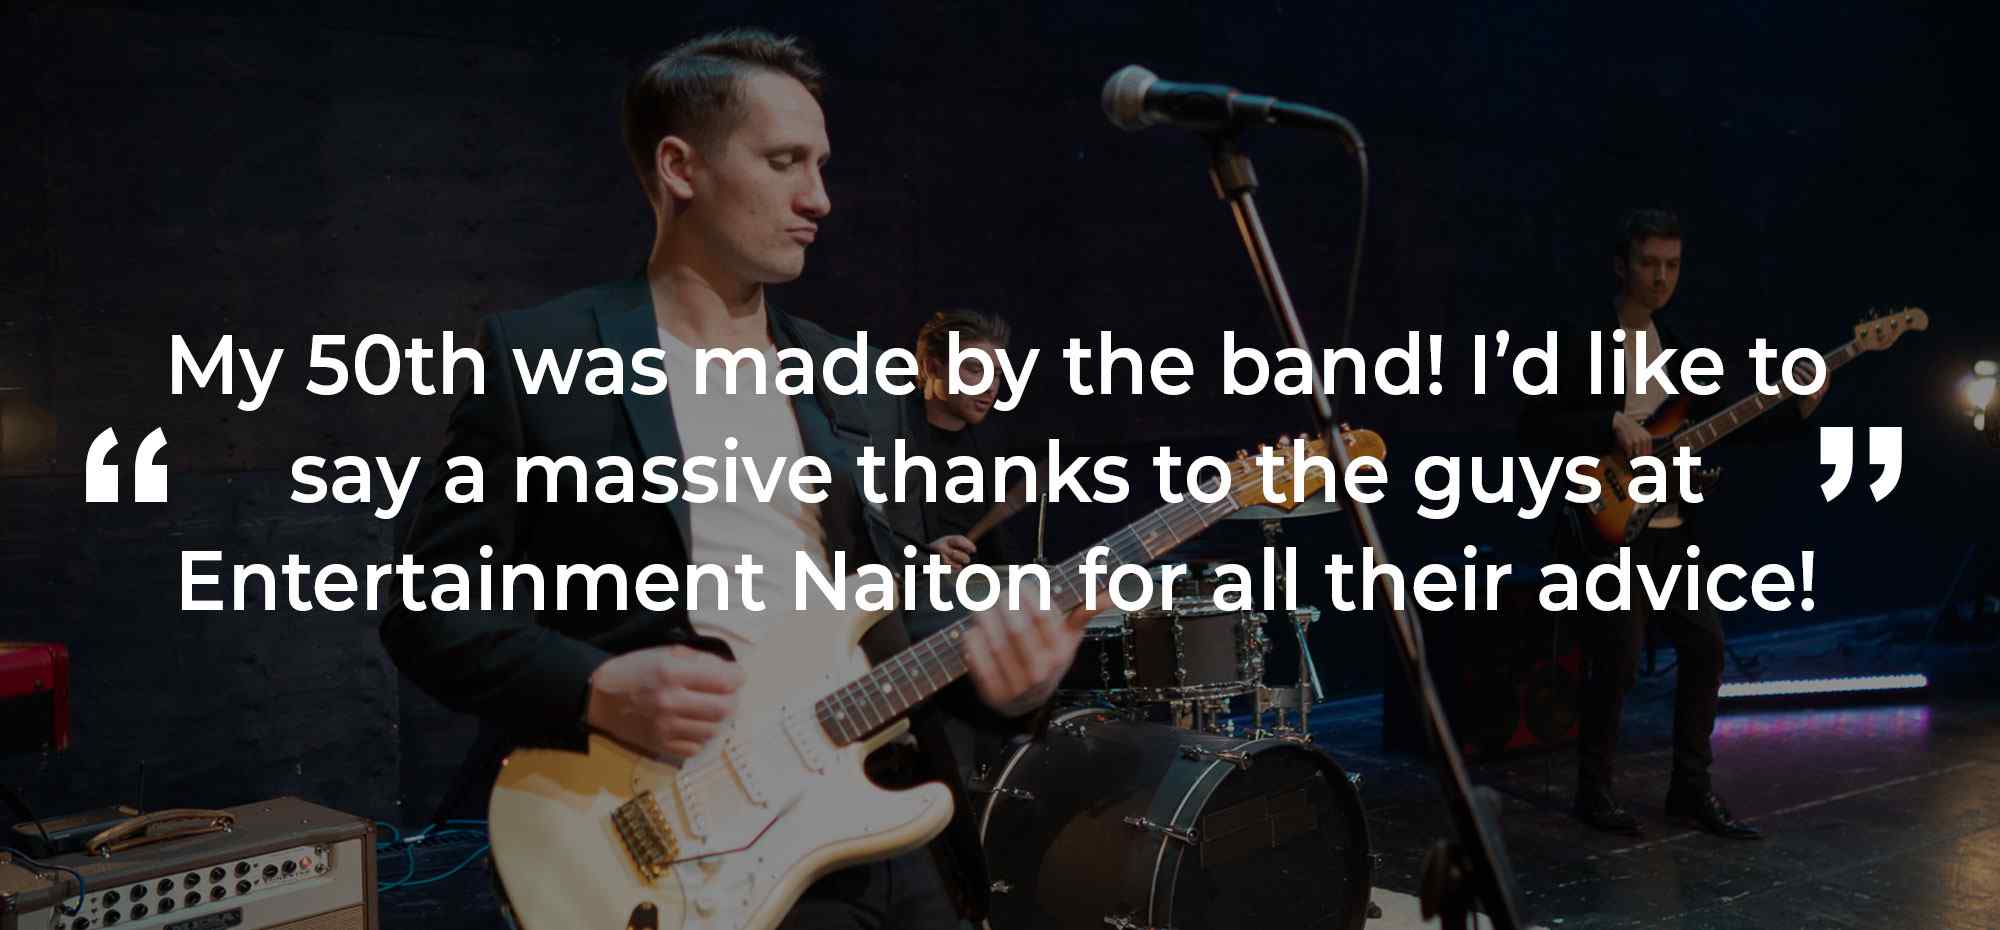 Client Review of a Party Band Carmarthenshire